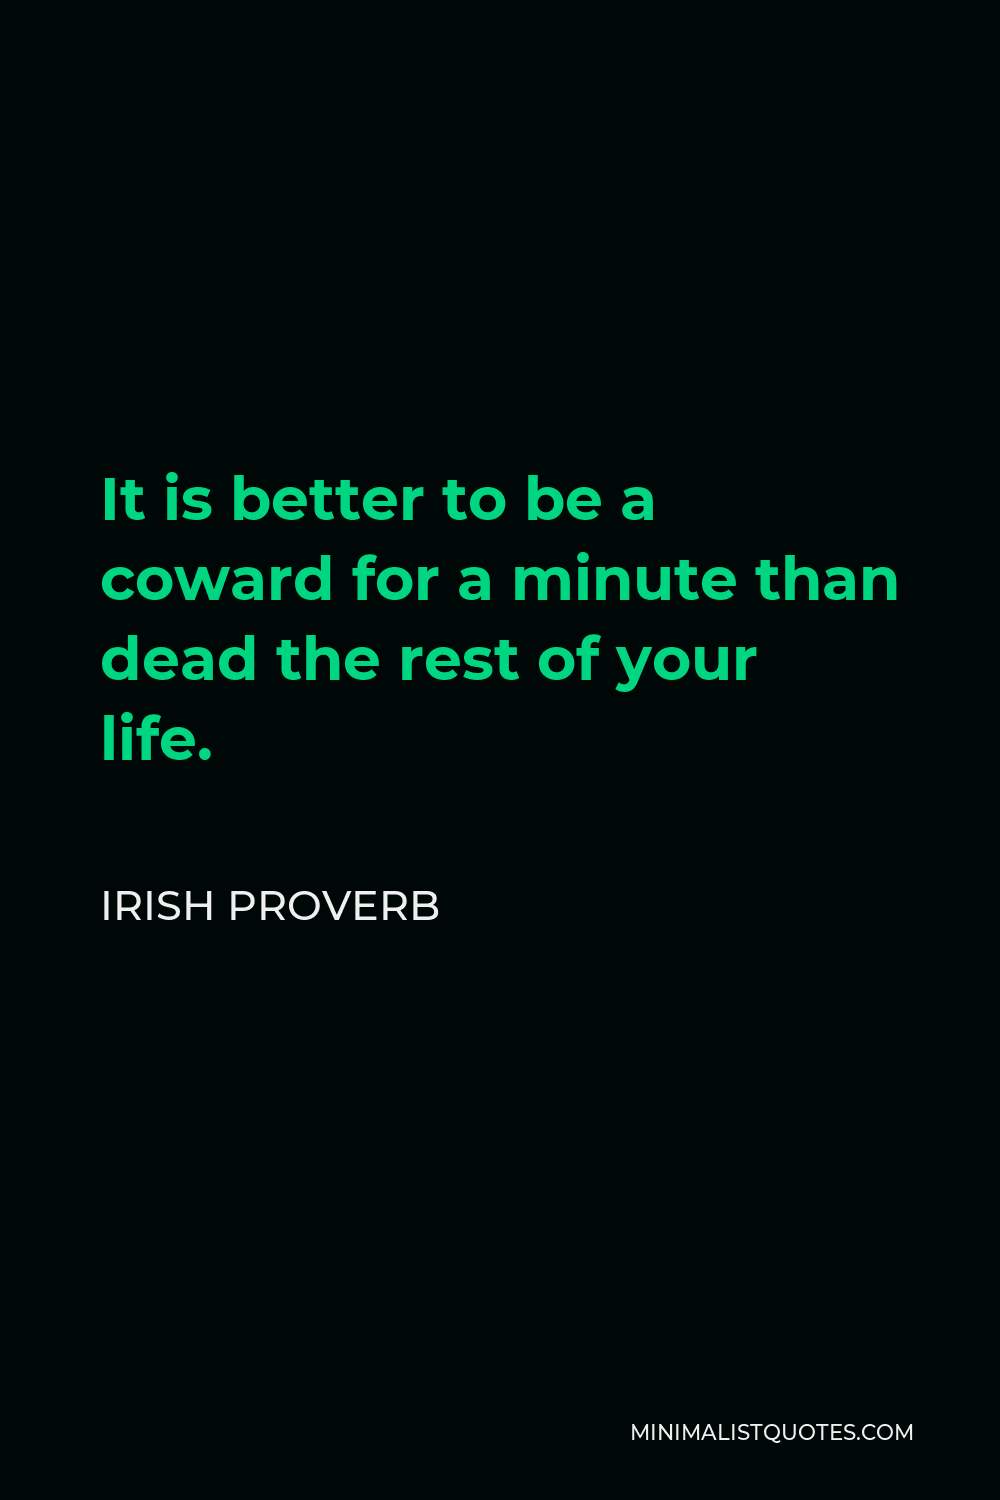 Irish Proverb Quote - It is better to be a coward for a minute than dead the rest of your life.